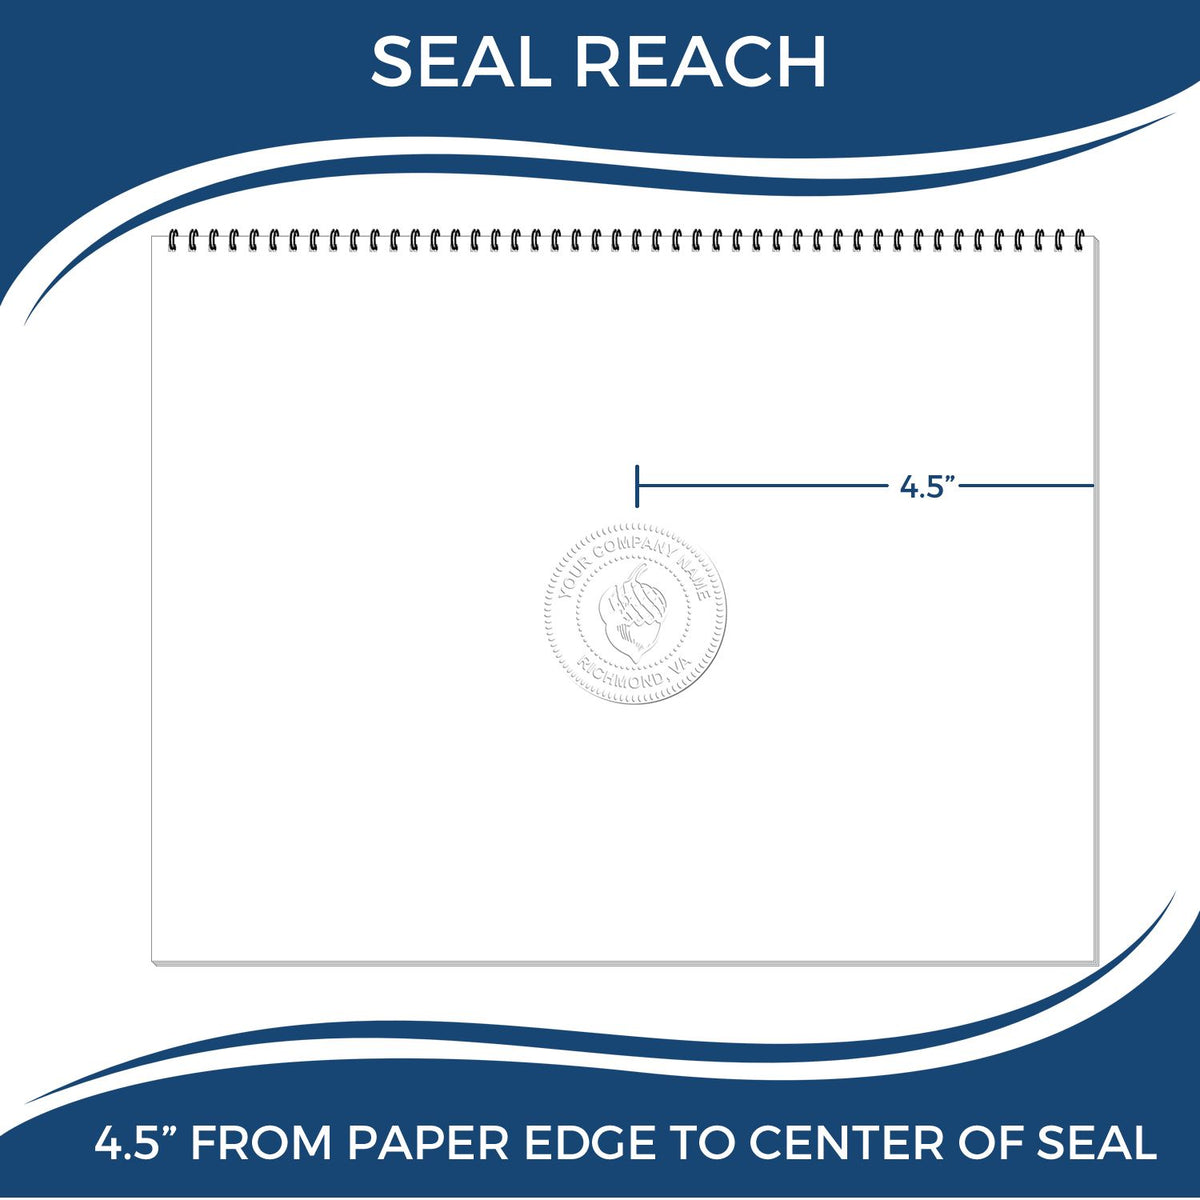 An infographic showing the seal reach which is represented by a ruler and a miniature seal image of the Extended Long Reach Maine Architect Seal Embosser